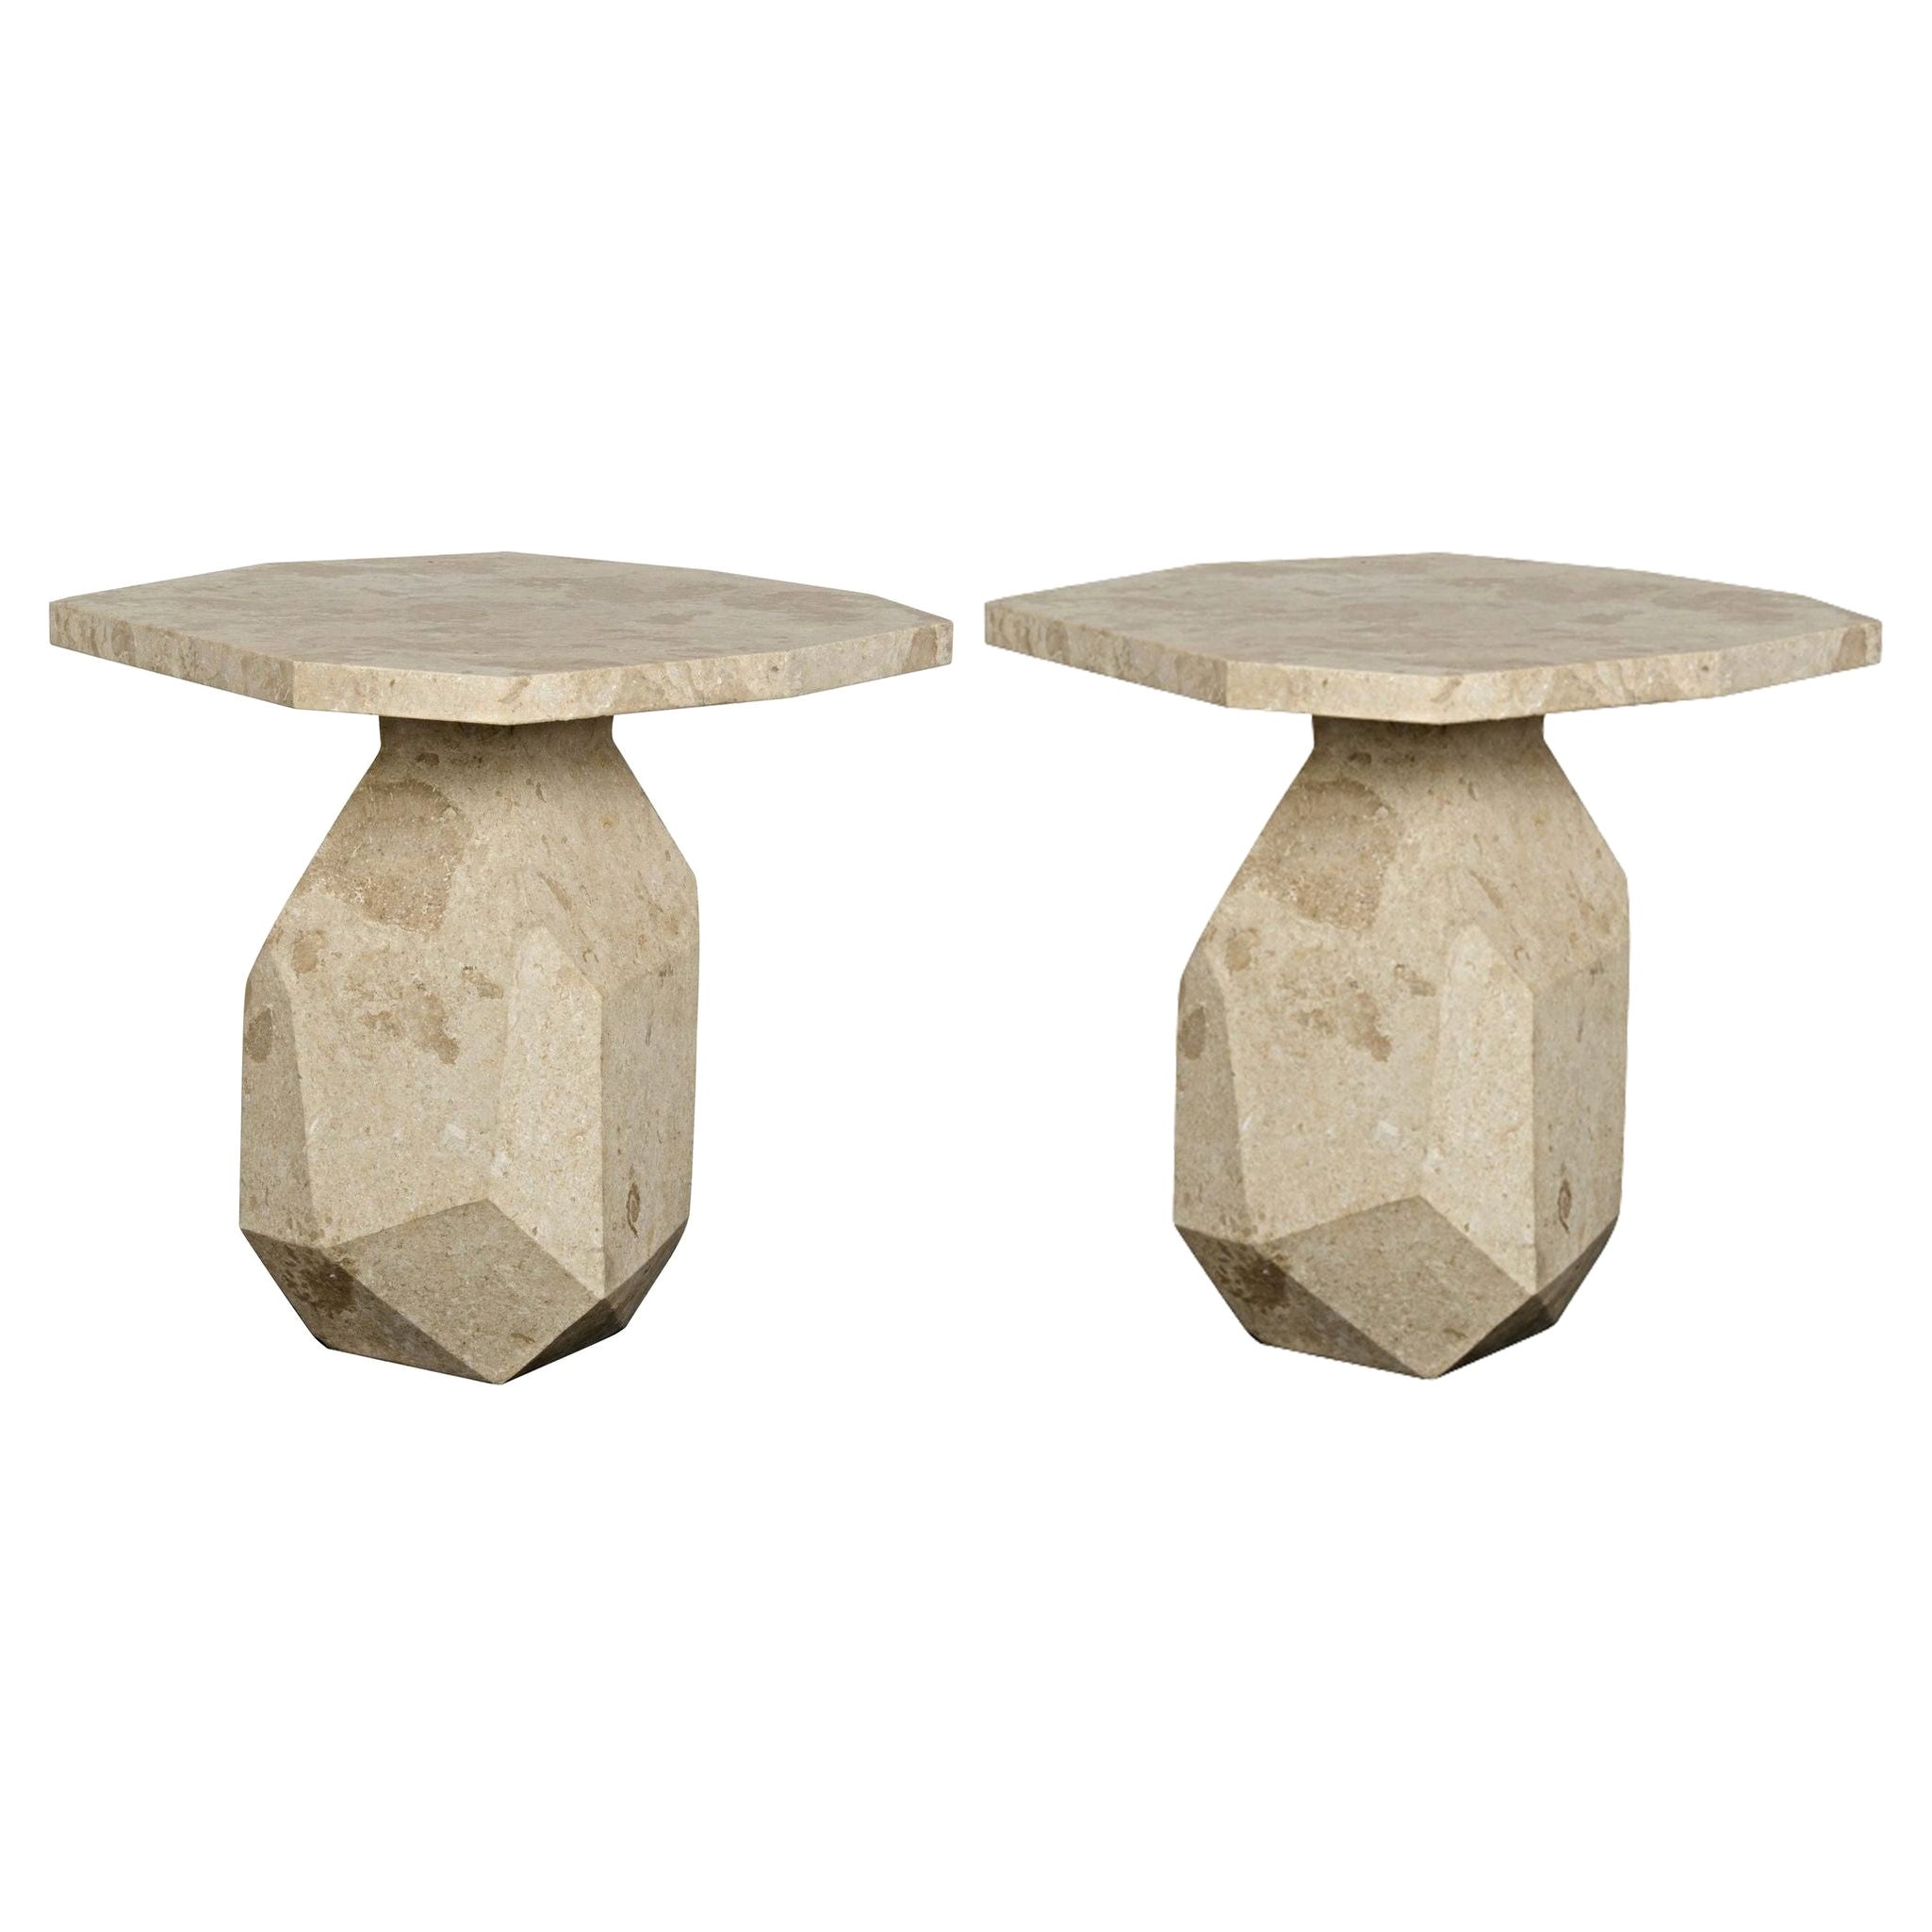 Pair of Modern Polyhedron Marble Side / End Tables by Noir, Organic Form